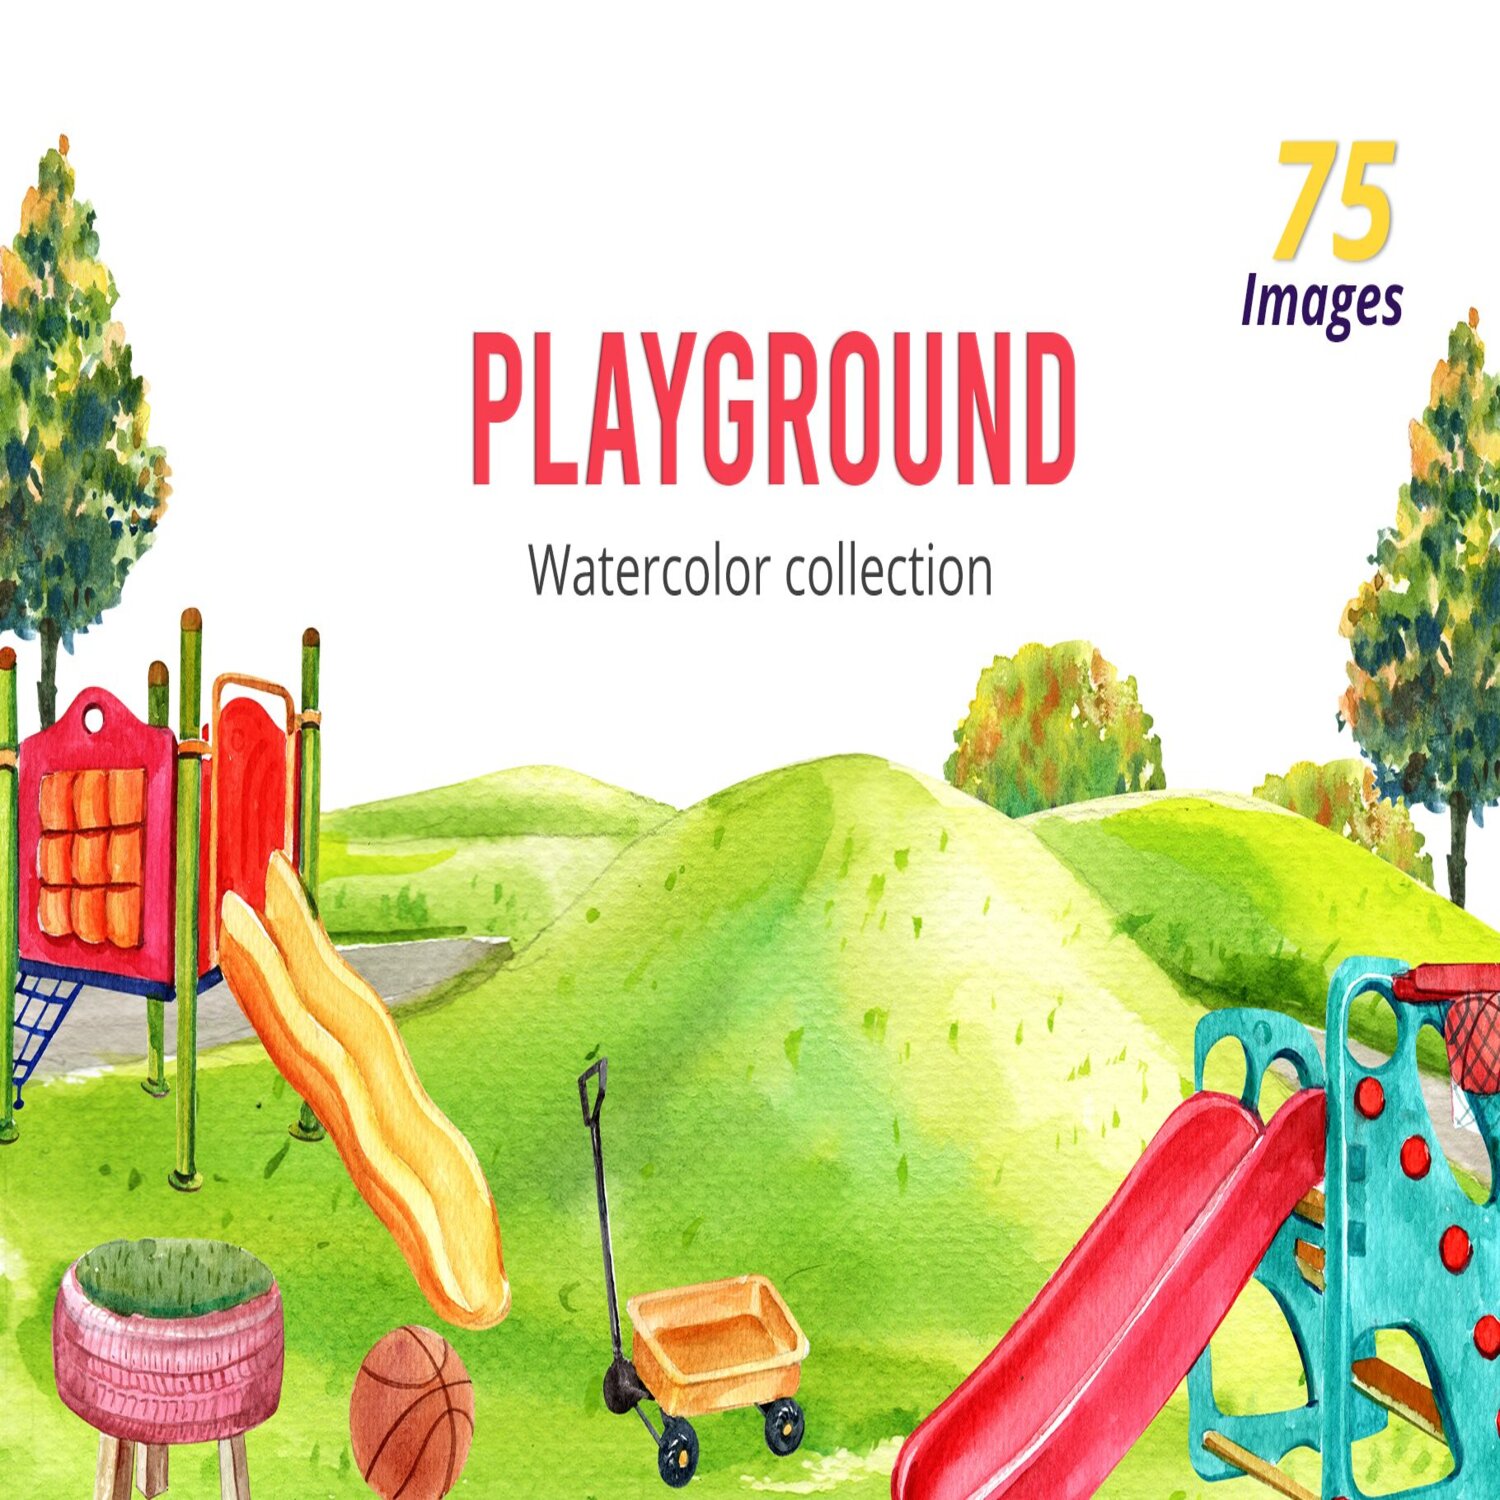 Playground Watercolor Collection cover.